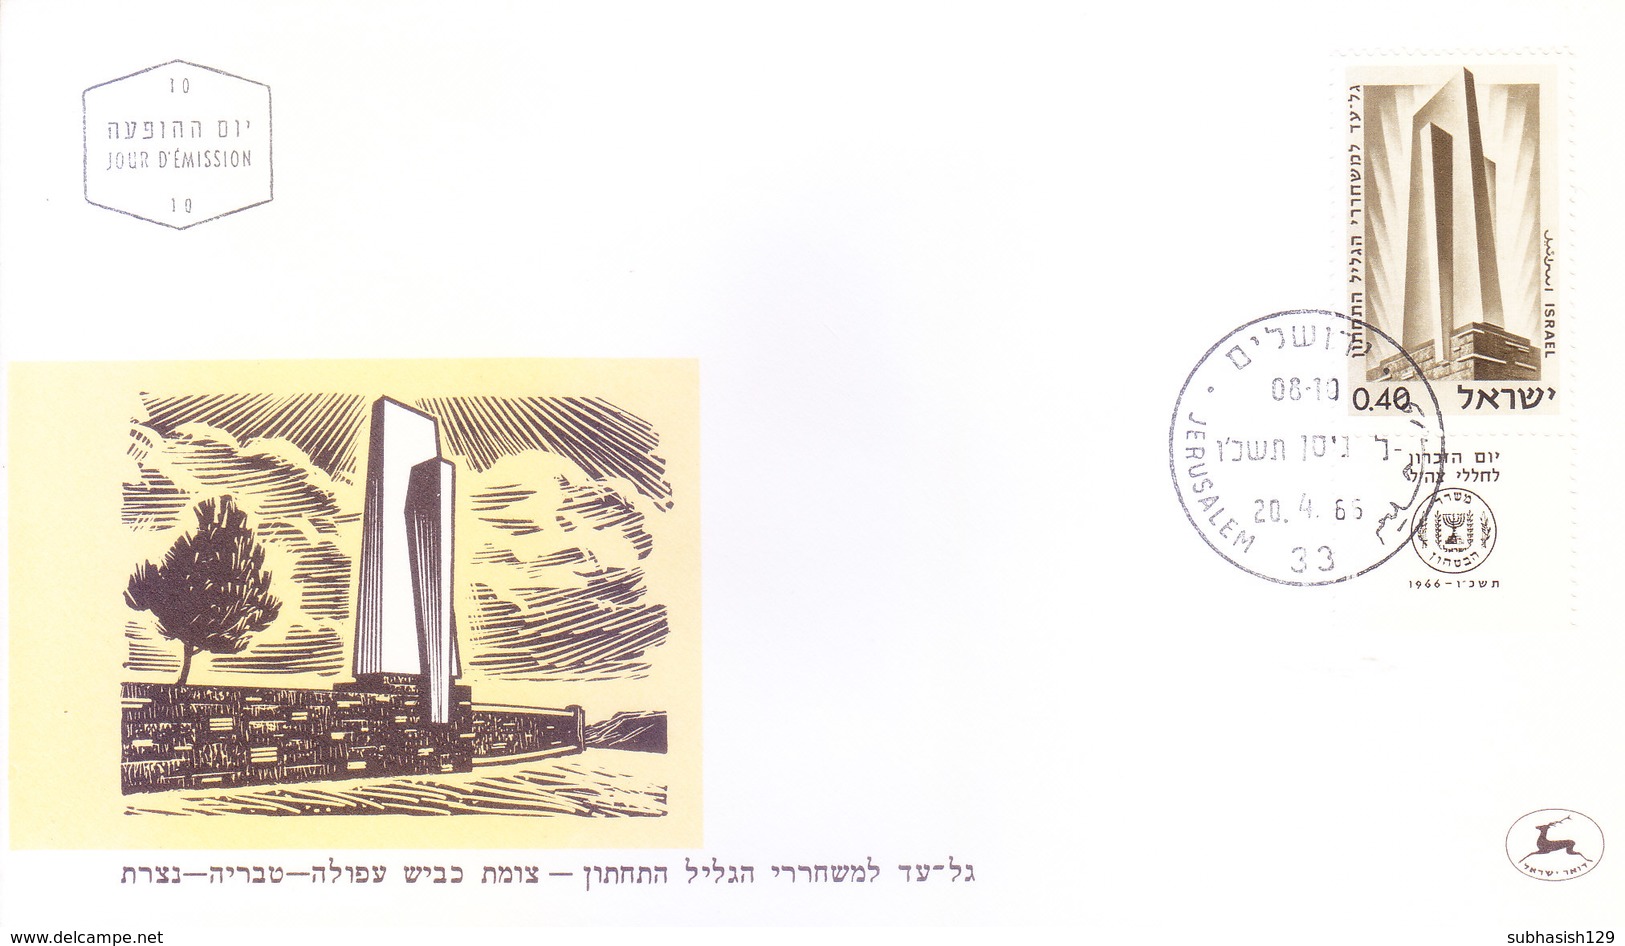 ISRAEL : FIRST DAY COVER : 20-04-1966 : ISSUED FROM JERUSALEM : FALLEN SOLDIER MEMORIAL DAY : USE OF TAB STAMP - Covers & Documents